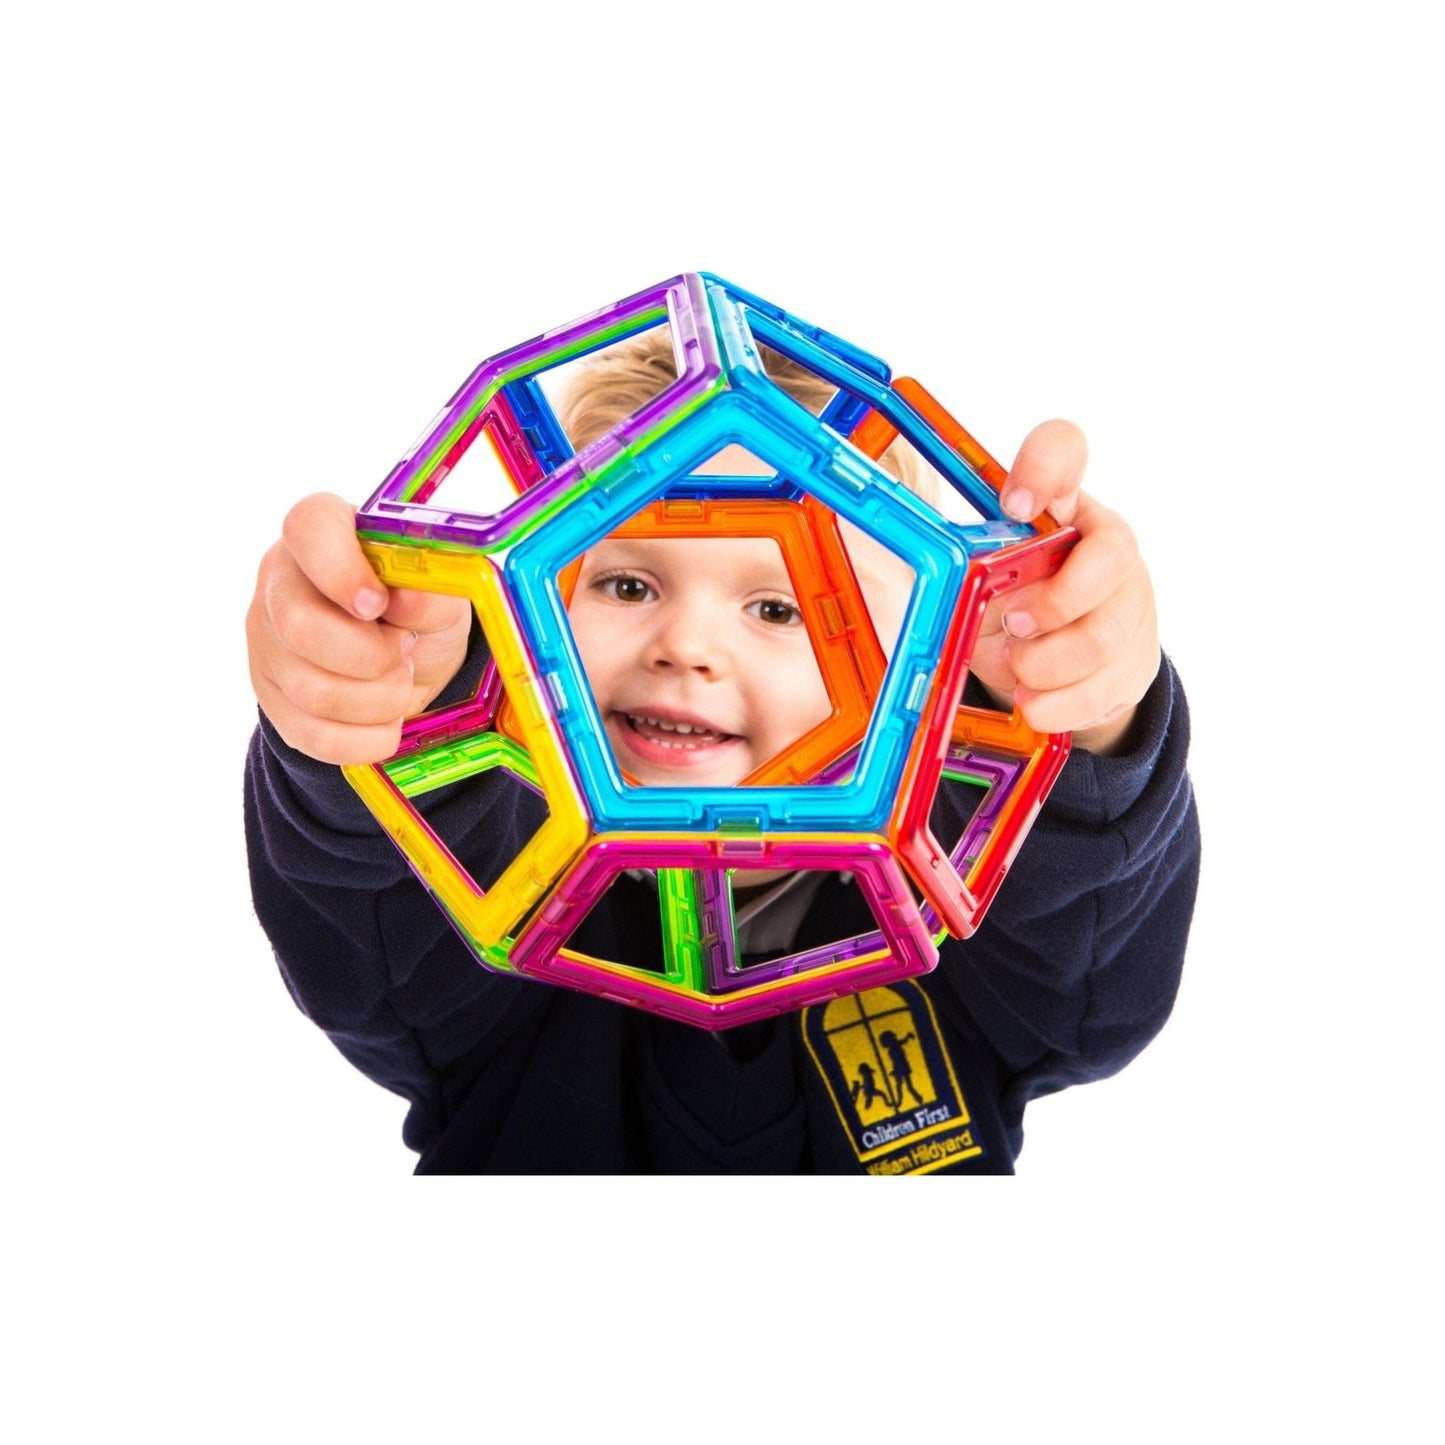 child holding shape made from Magformers construction toy 62 Piece Set